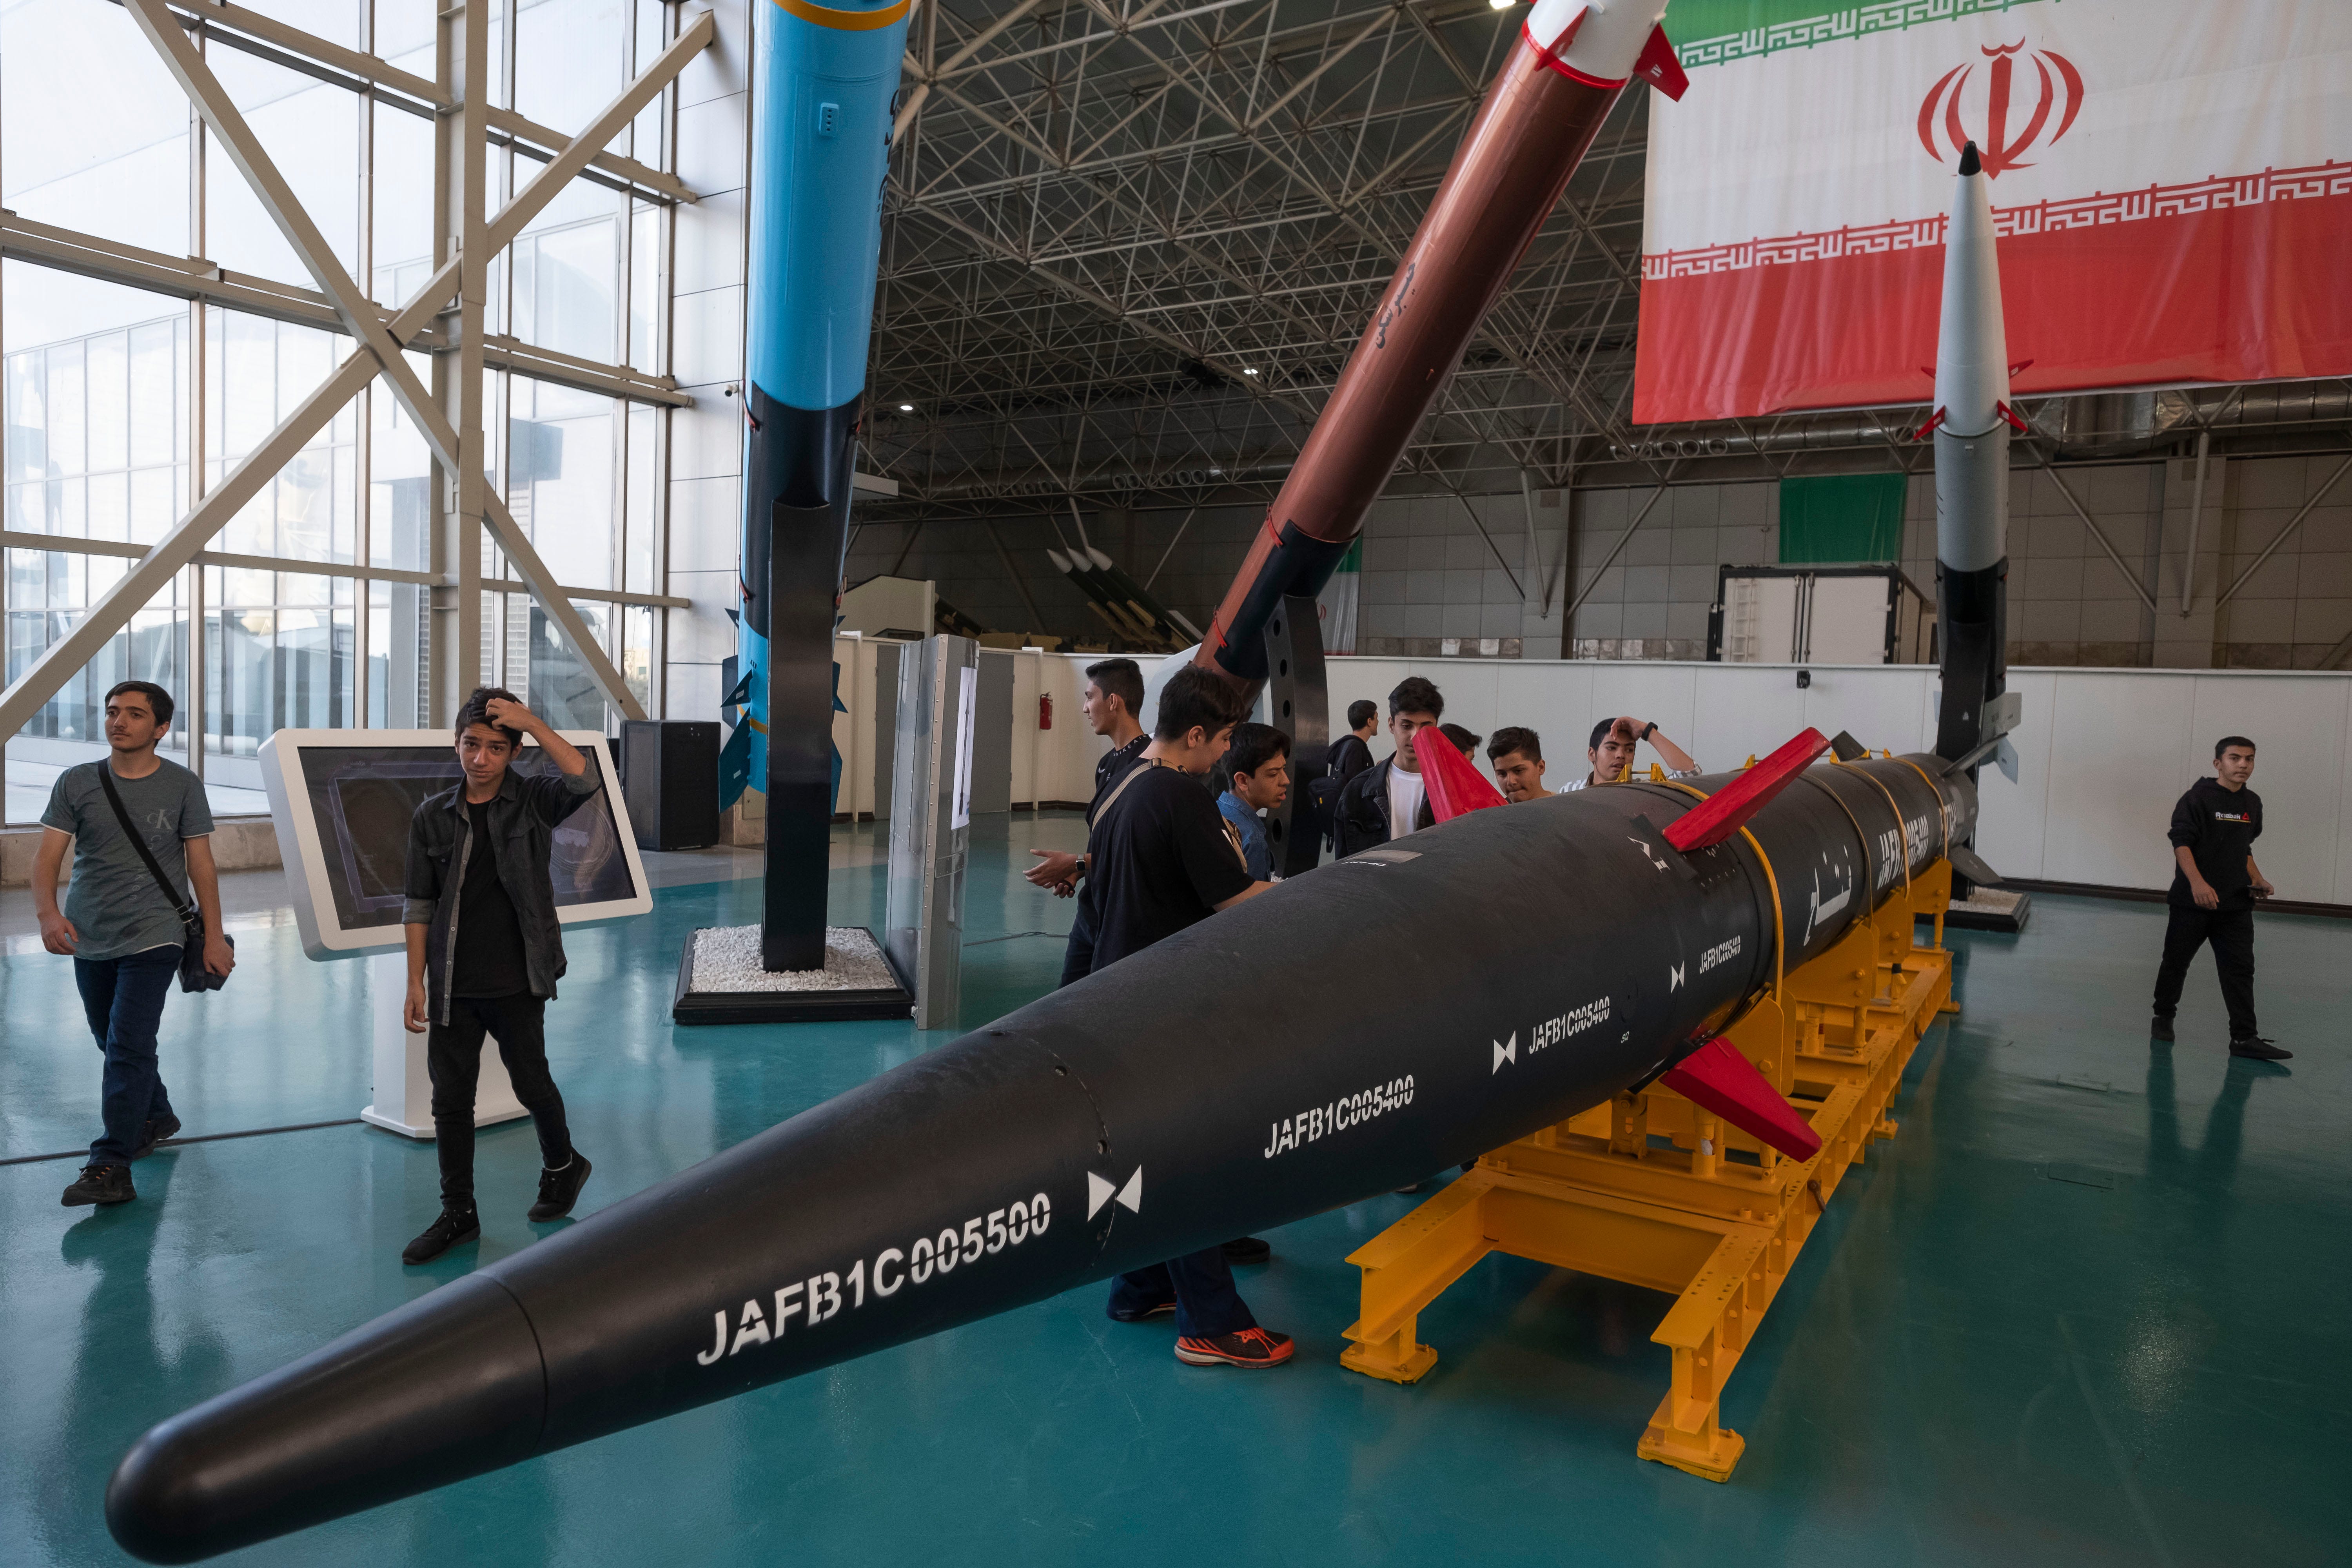 Iran celebrates new hypersonic missile amid new threats by its proxies against US, allies